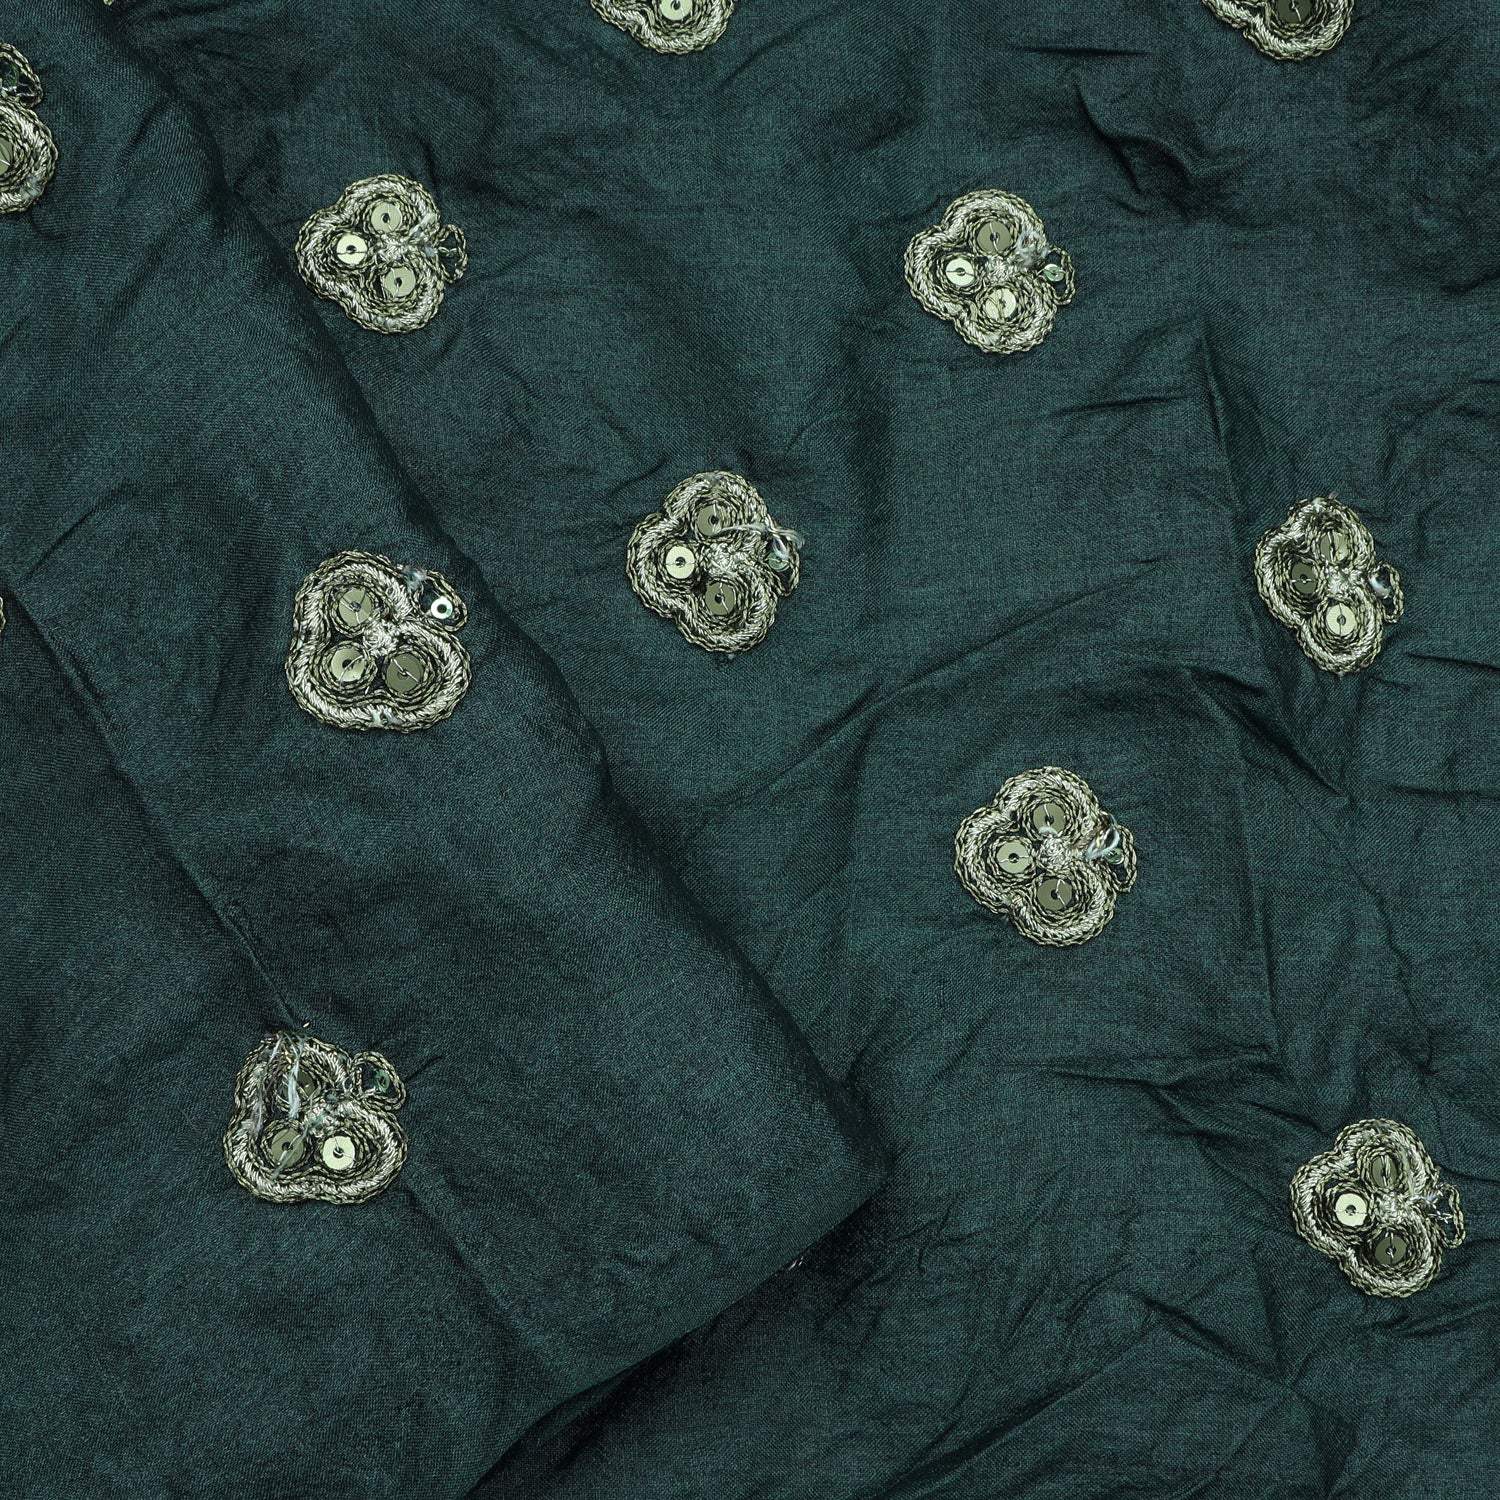 Forest Green Printed Bandhani Silk Saree With Embroidery - Singhania's